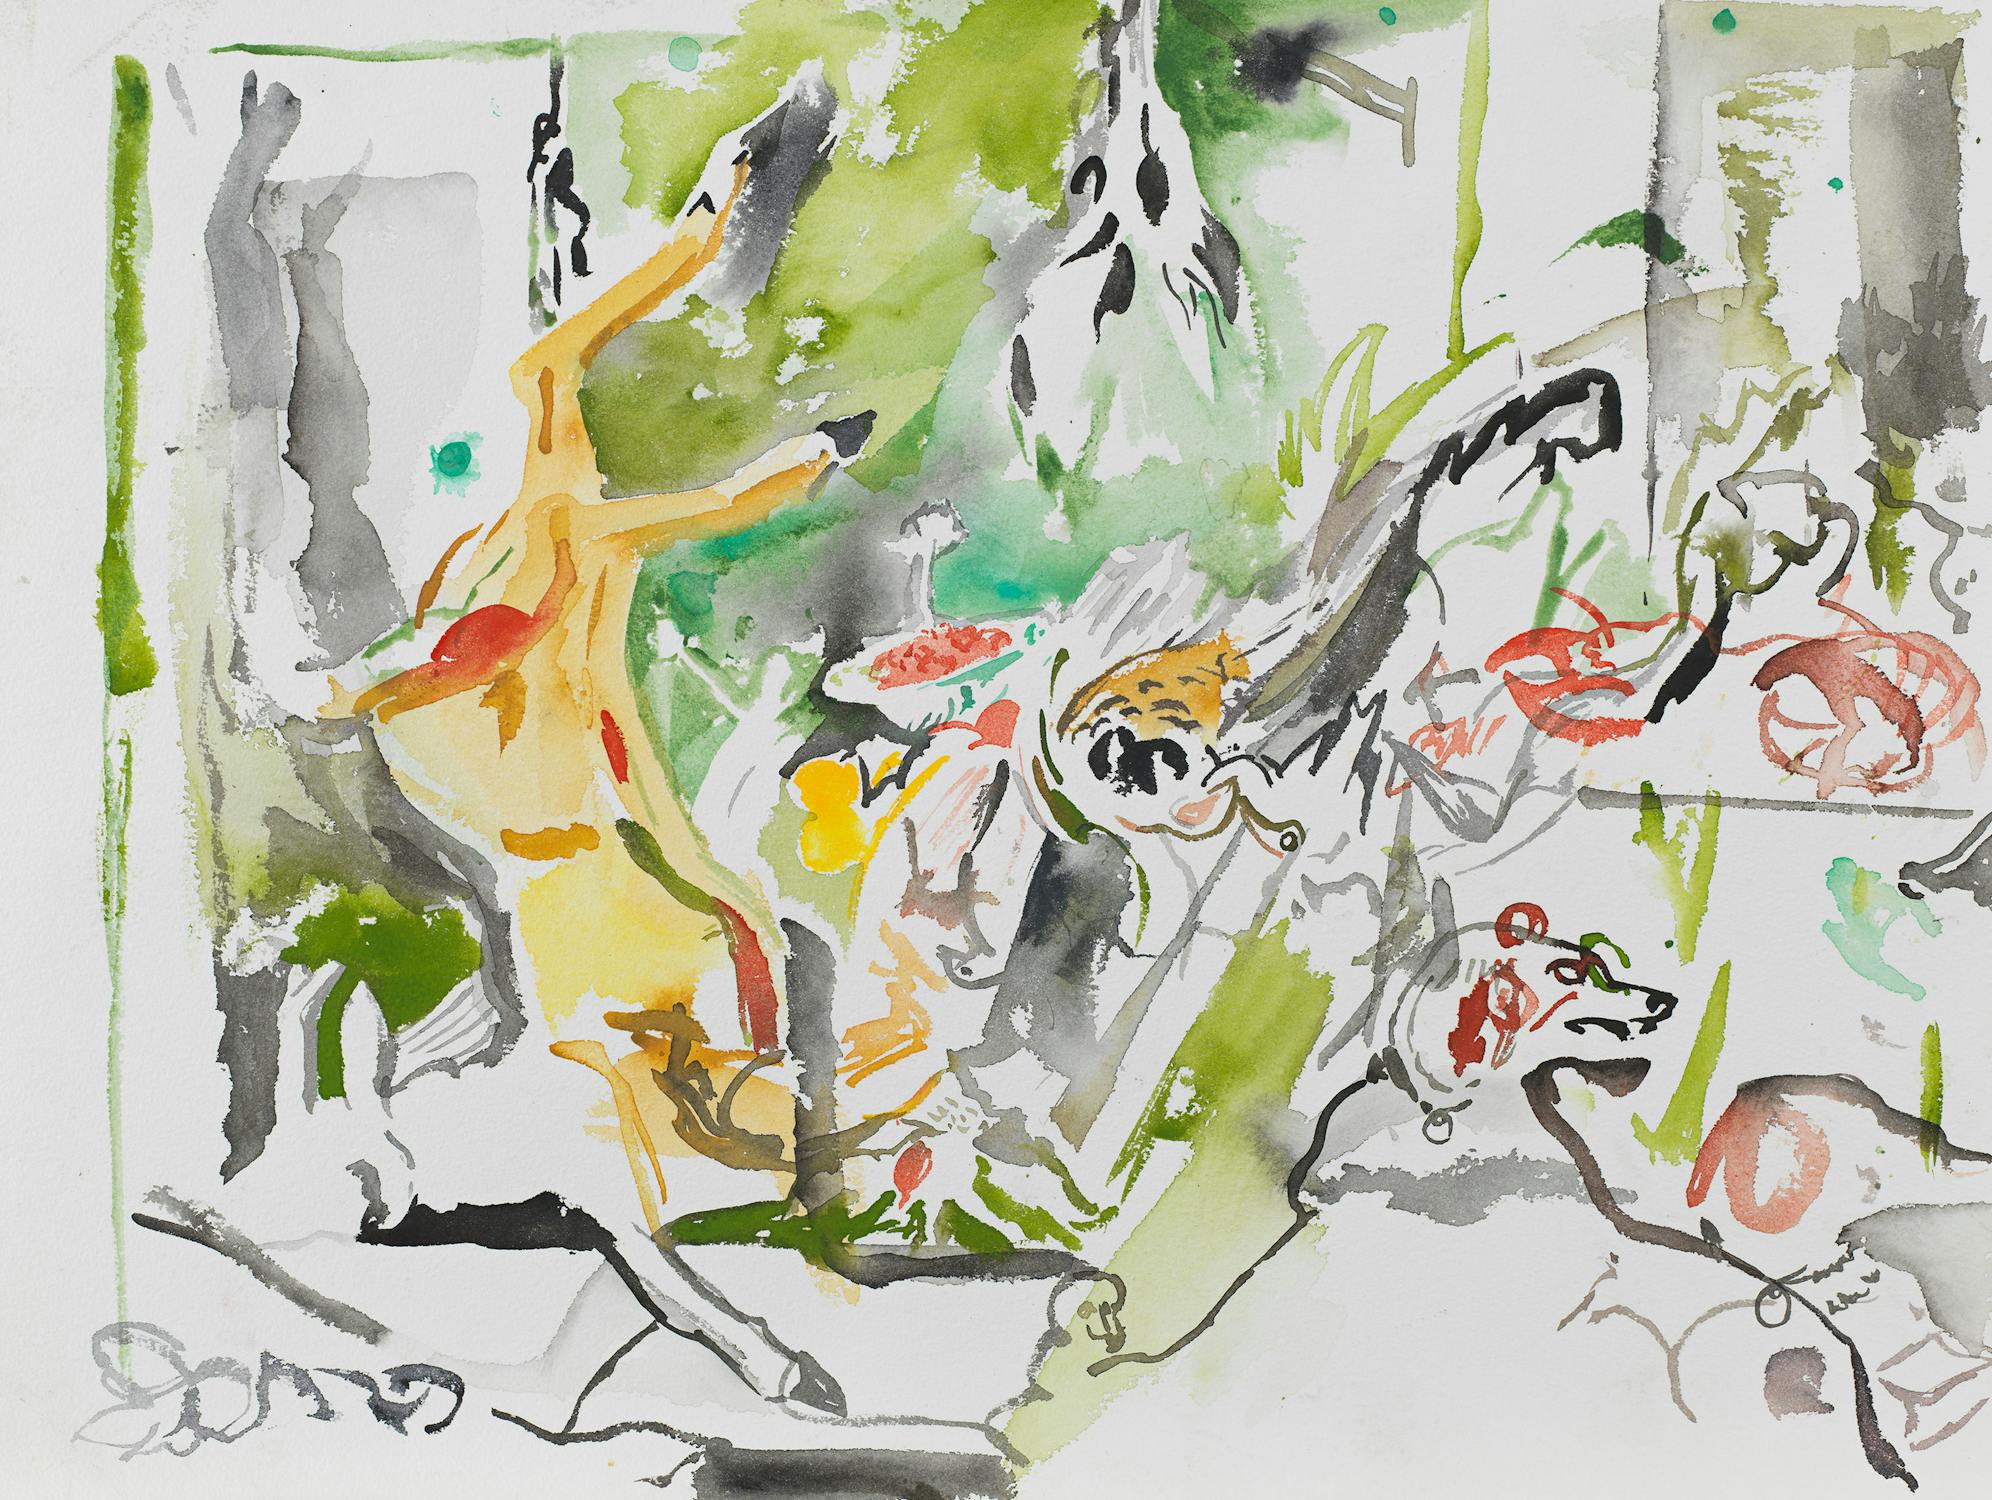 a vivid watercolour painting of abstracted hunting scene, layered with colourful foliage and various animals